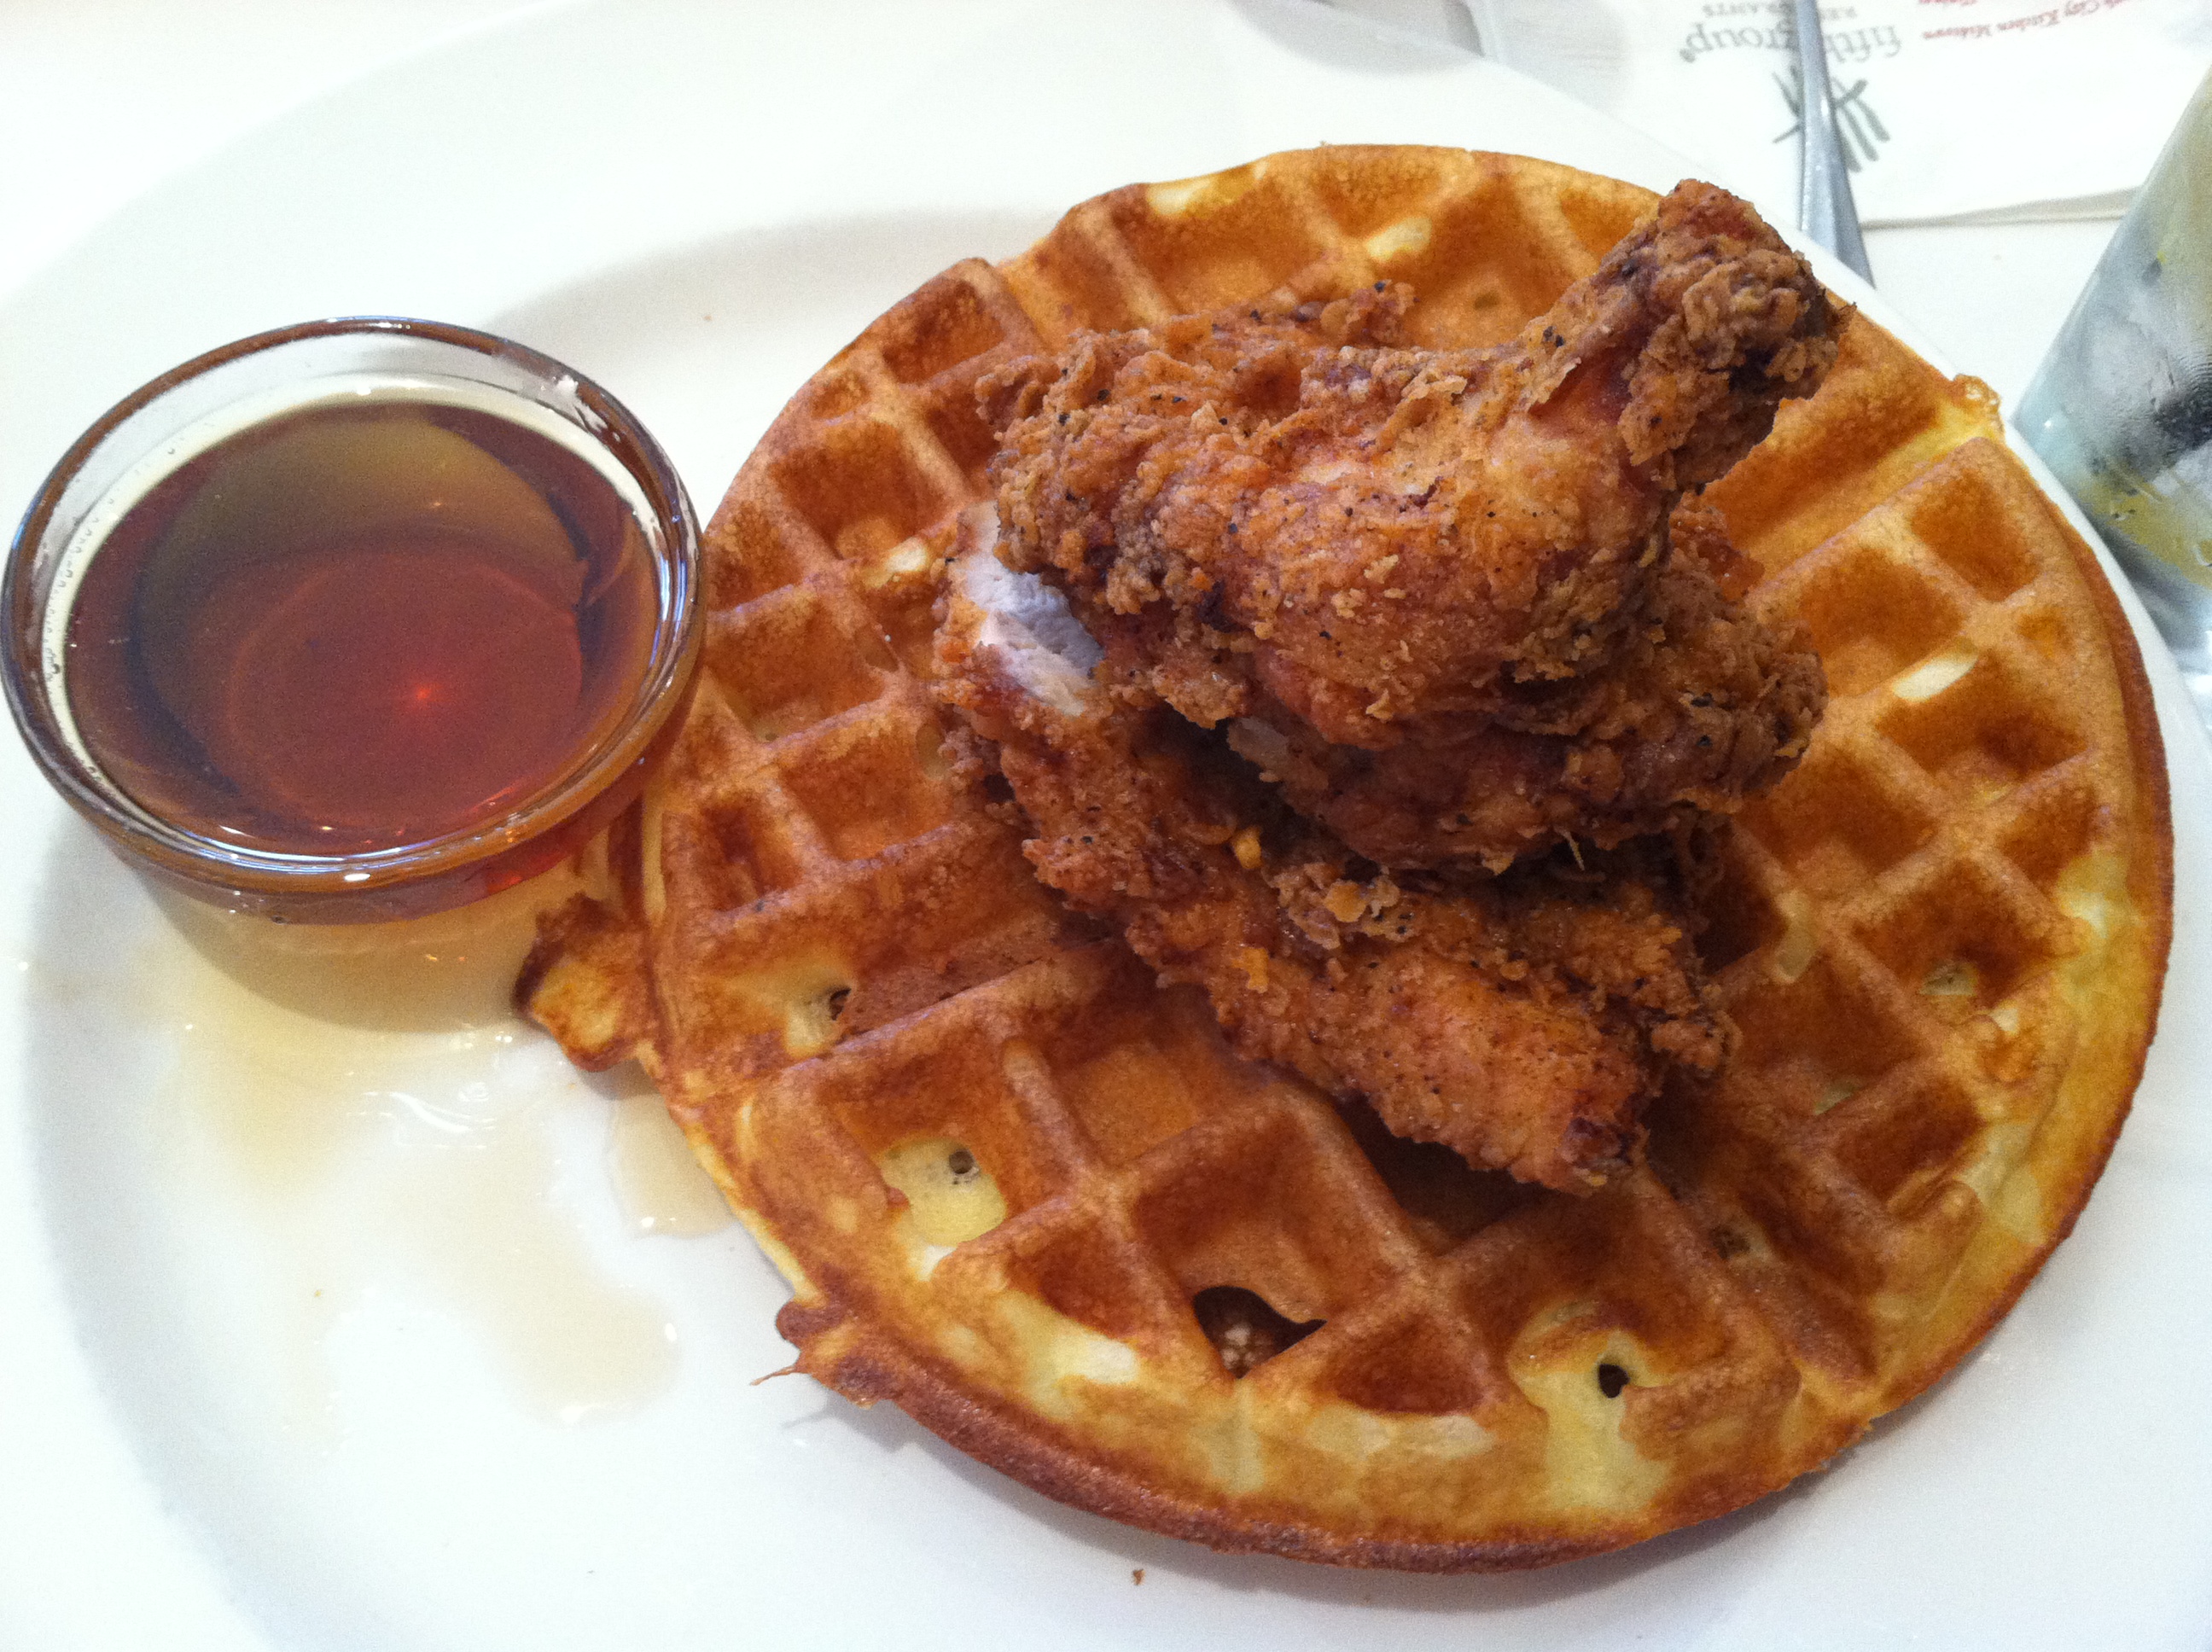 Chicken And Waffles At South City Kitchen The Misadventures Of A